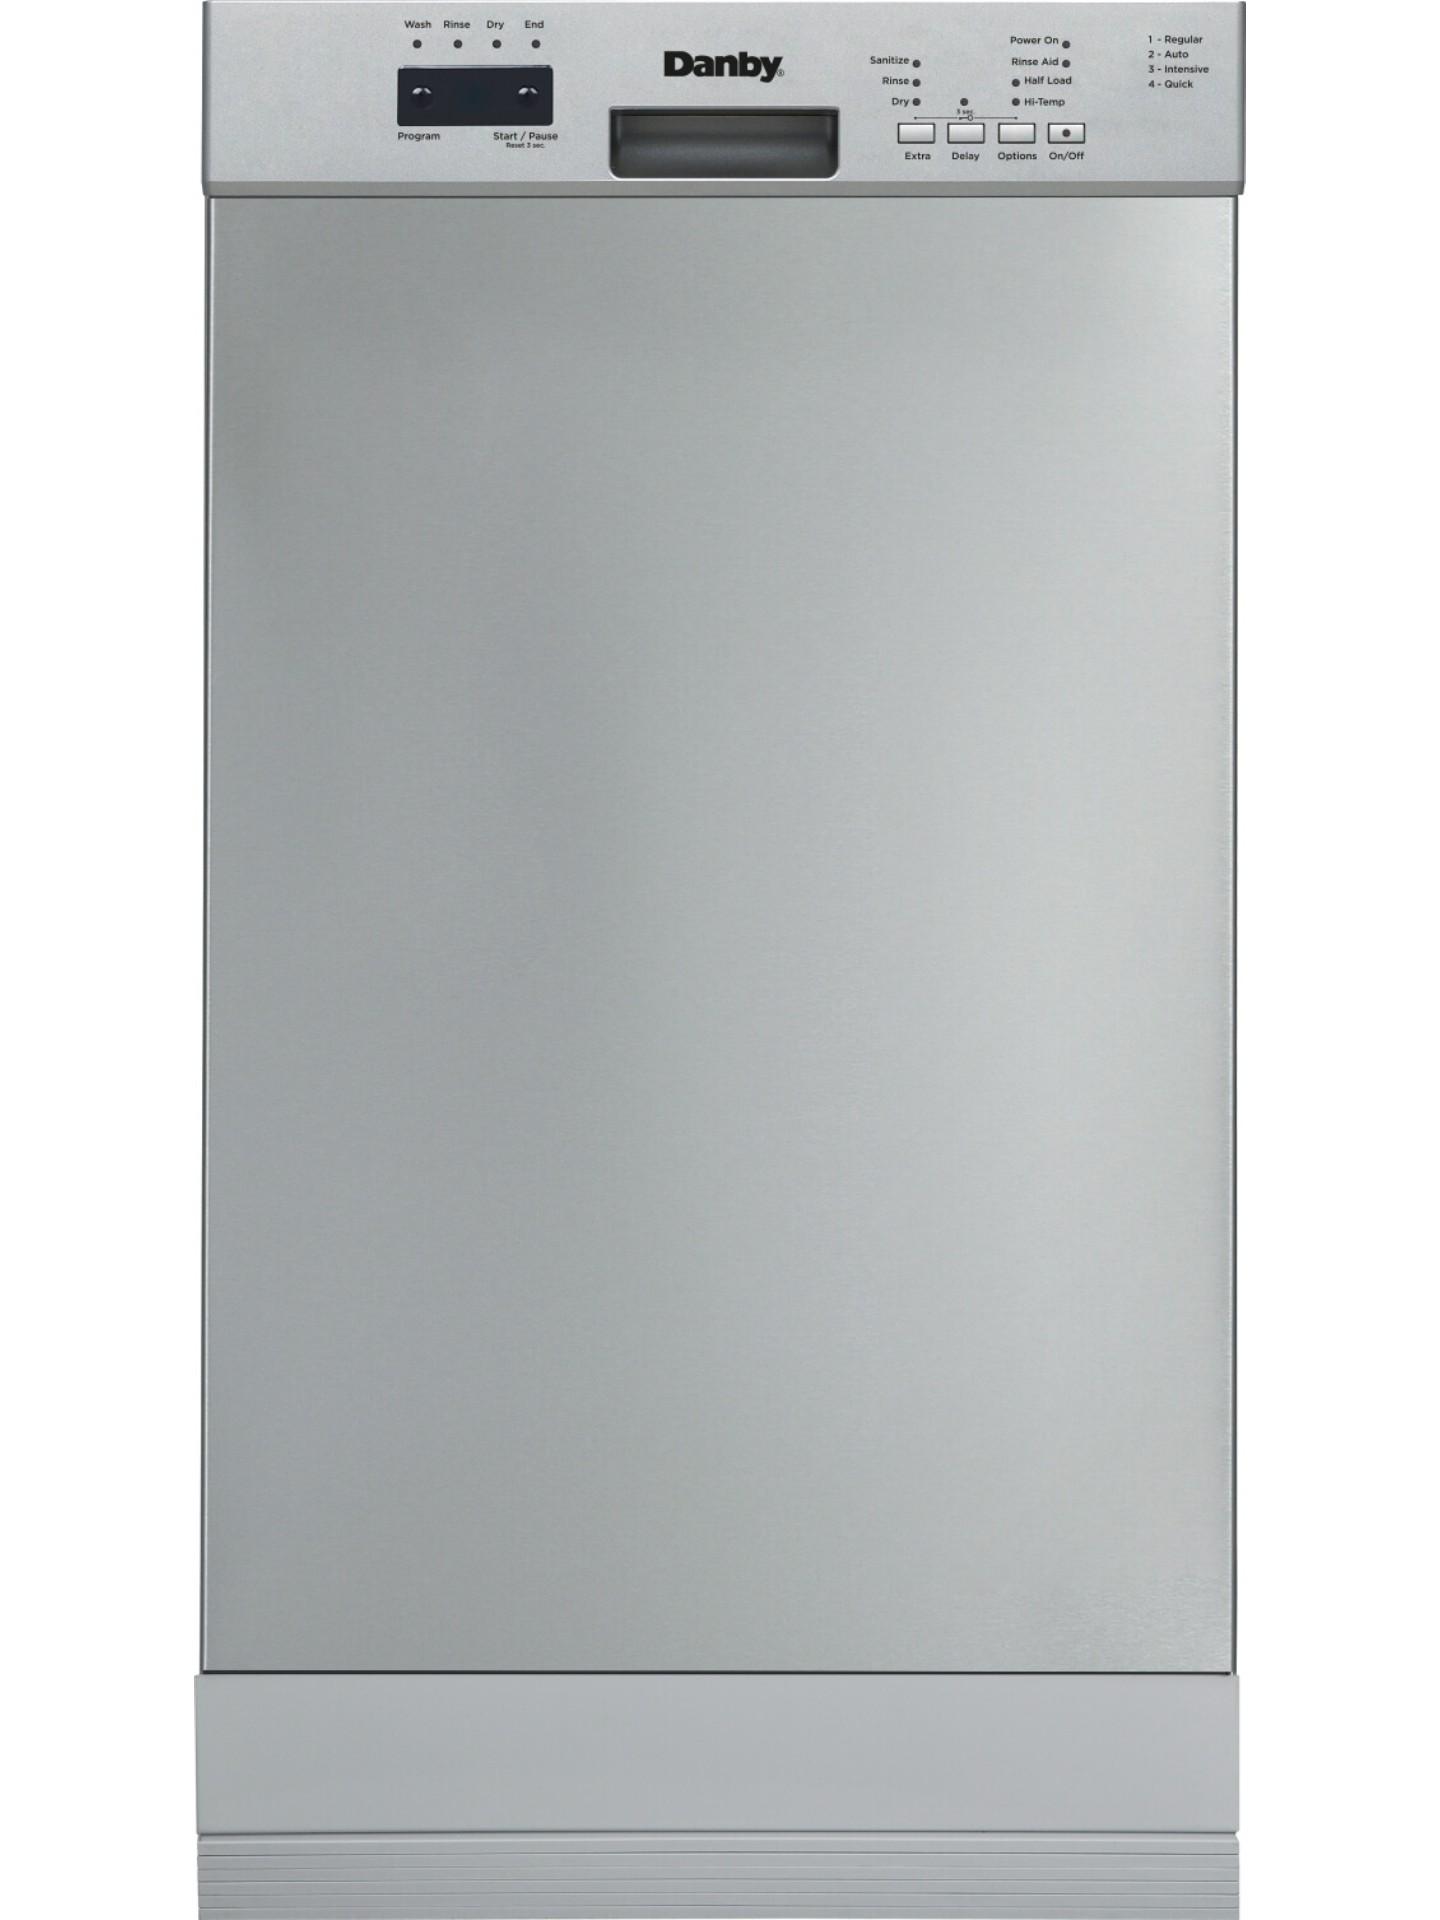 Danby DDW18D1ESS Danby 18" Electronic Dish Washer Stainless Steel